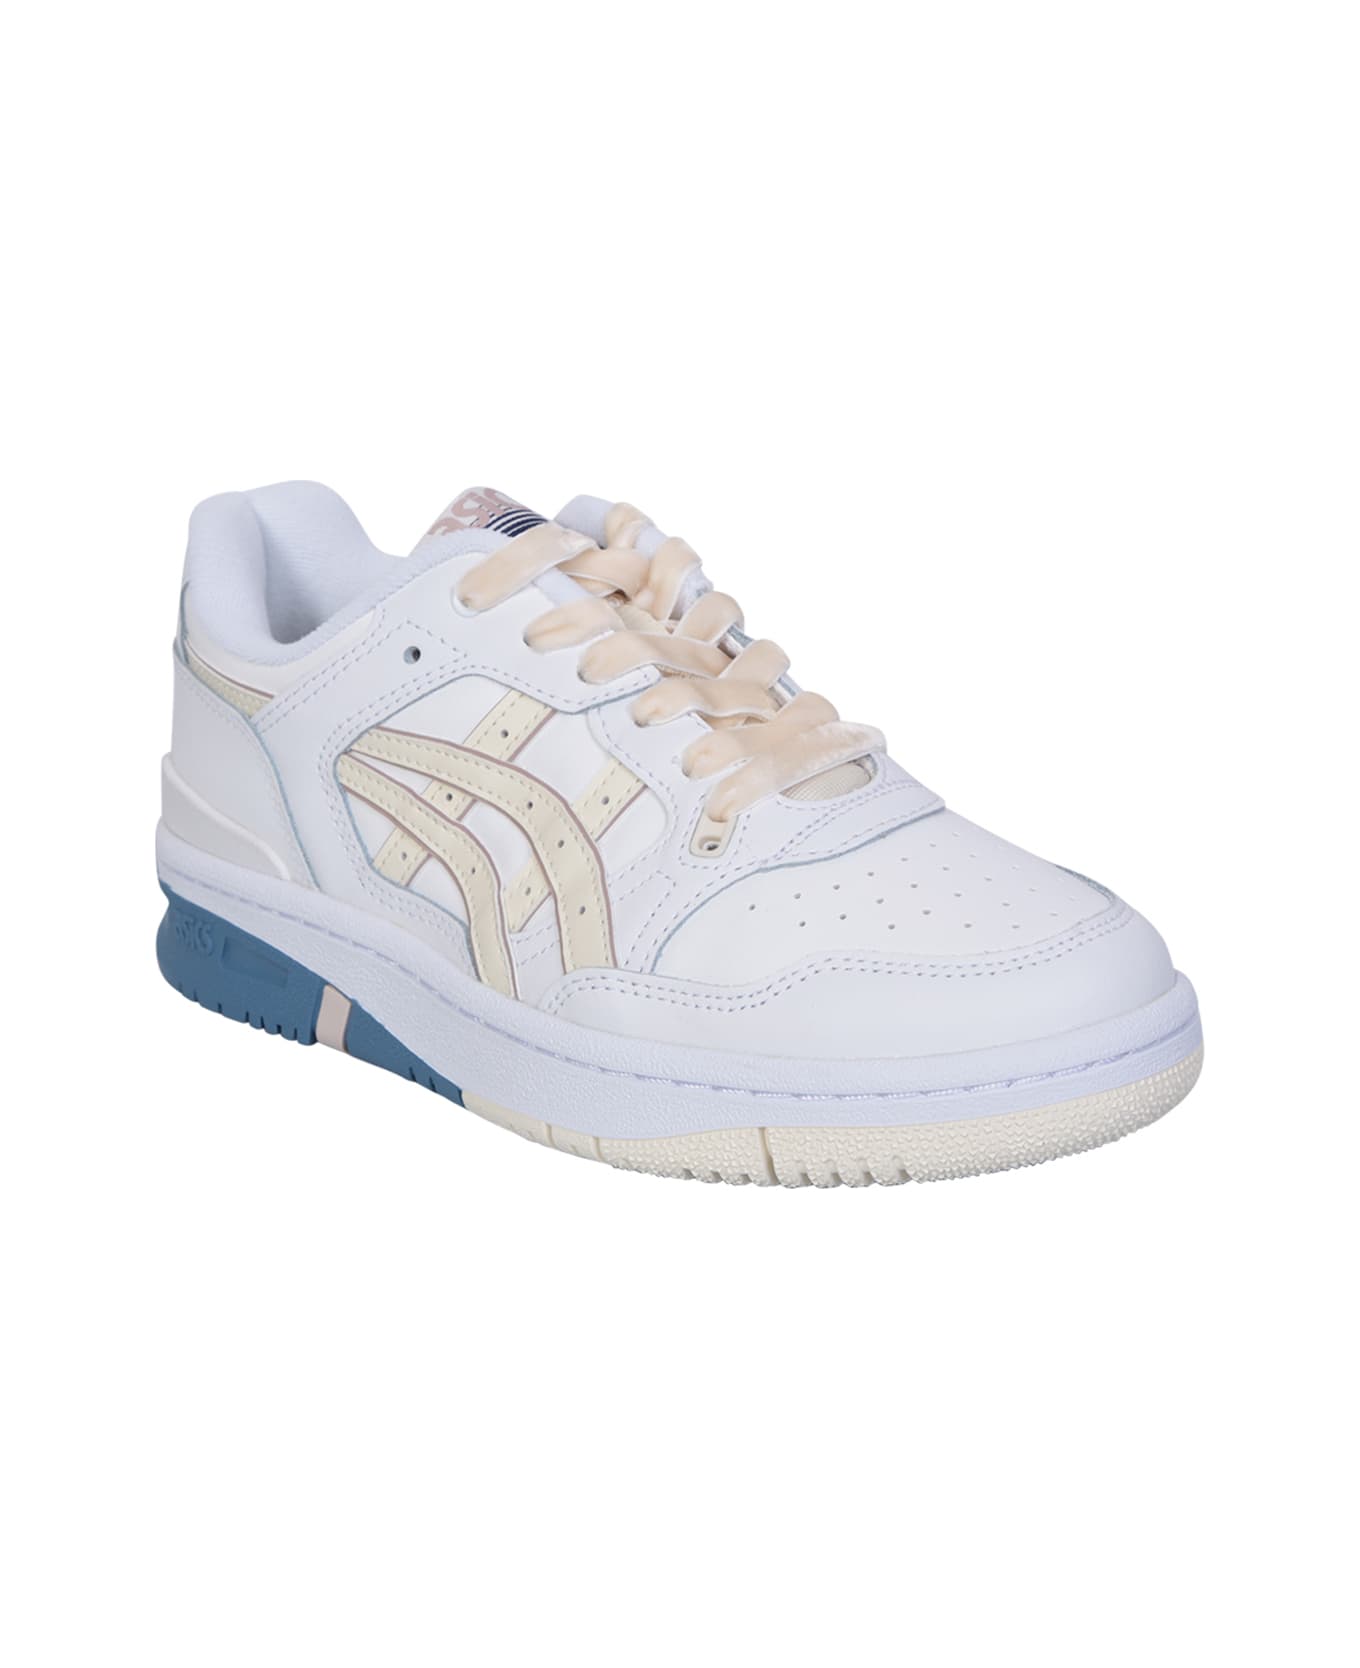 Asics White And Beige Ex89 Sneakers - White